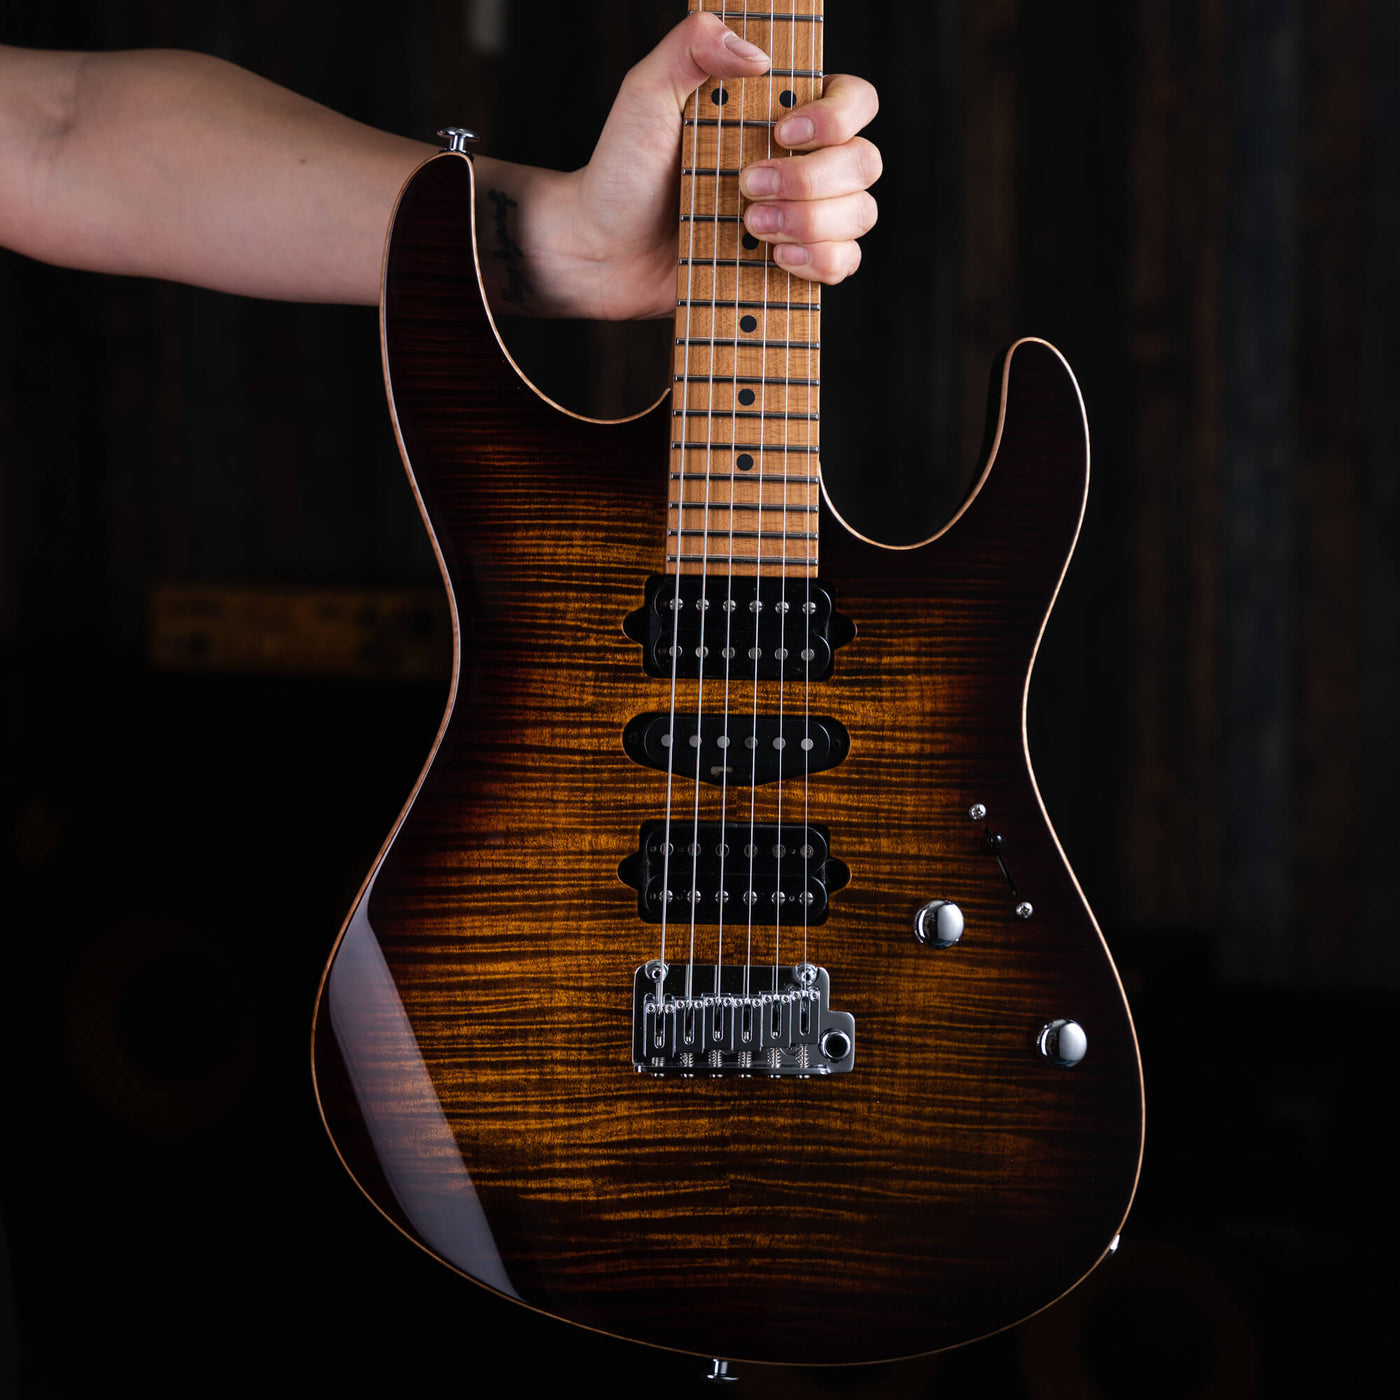 Suhr Modern Plus Bengal Burst 2024 - $3799990 - Gearhub - The Modern Plus features a roasted maple neck with pau ferro or maple fingerboard. The Modern Plus retains many of the original specifications of the Modern Pro including the sleek elliptical neck profile, balanced asymmetrical body, innovative neck heel and stunning flame maple top. Proprietary Suhr locking tuners and the Gotoh 510 tremolo provides superior tuning stability. Cuerpo • Modelo: Modern Plus• Madera: Basswood• Madera top: Flame Maple• Bi